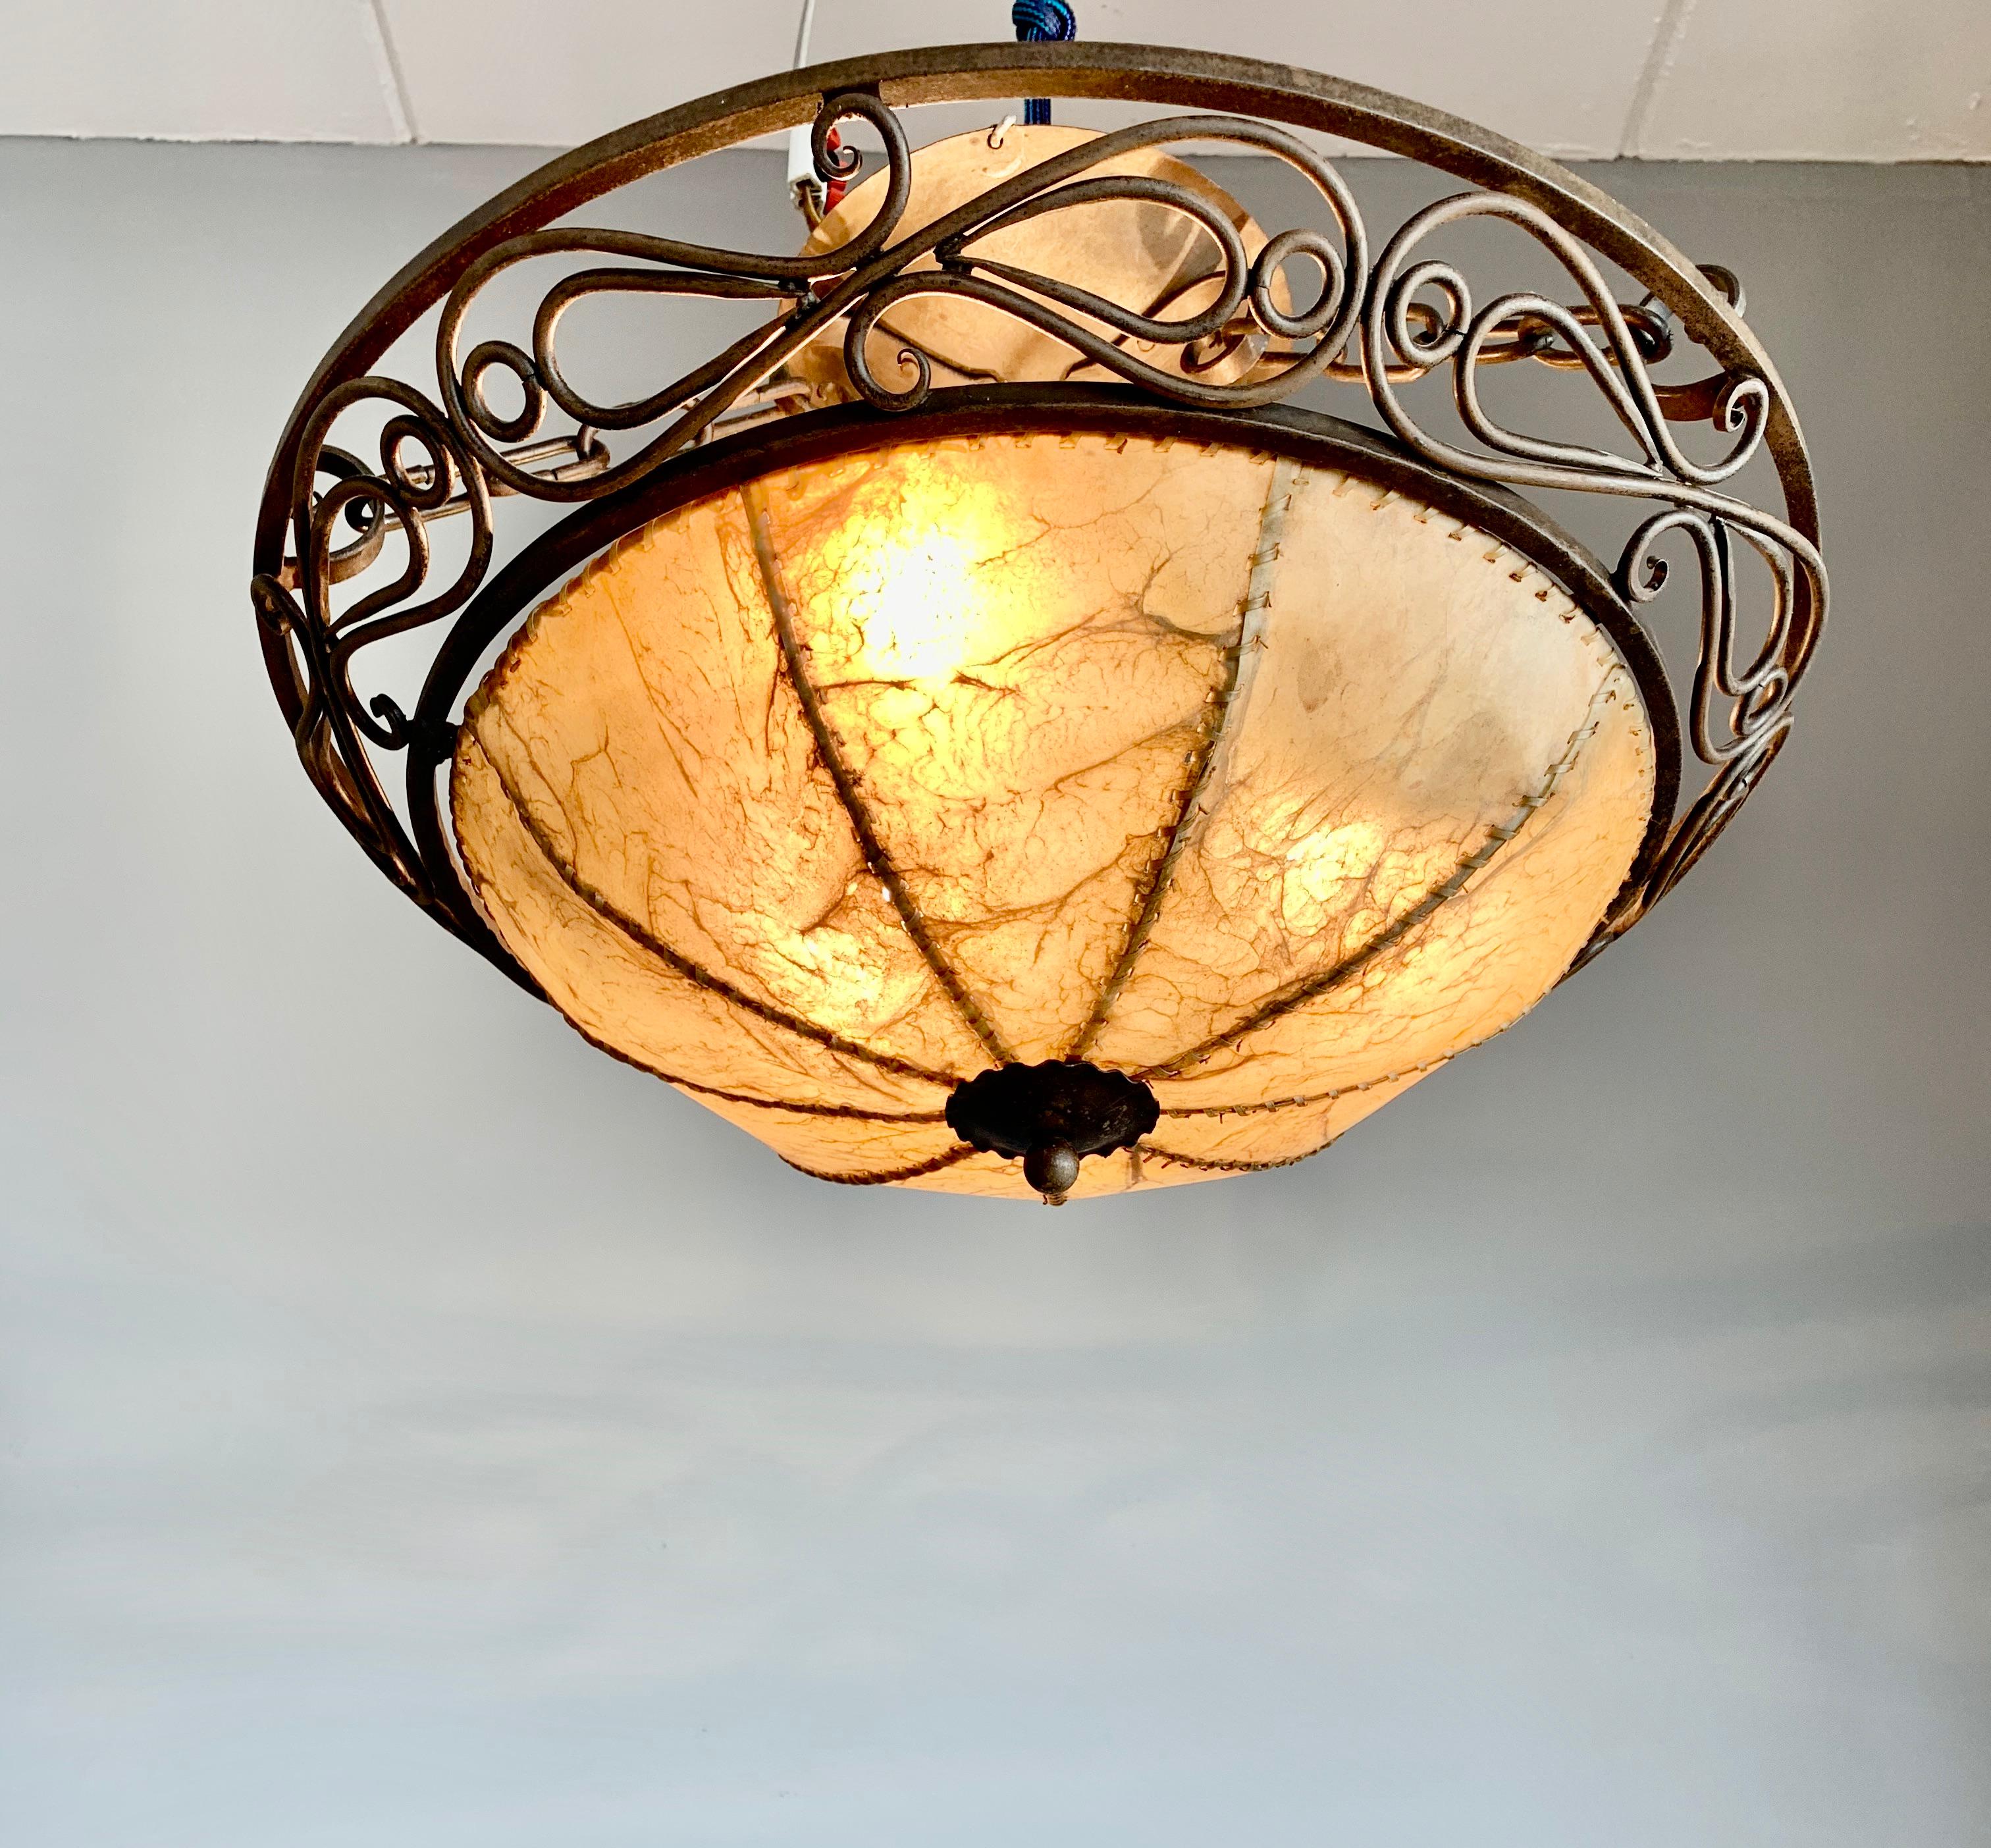 Stylish and handcrafted Arts and Crafts ceiling lamp.

This spherical and manly ceiling lamp is entirely handcrafted of strong, lasting and natural materials. The shade of animal hide gives this lamp it's warm and rustic look. This lamp comes with a